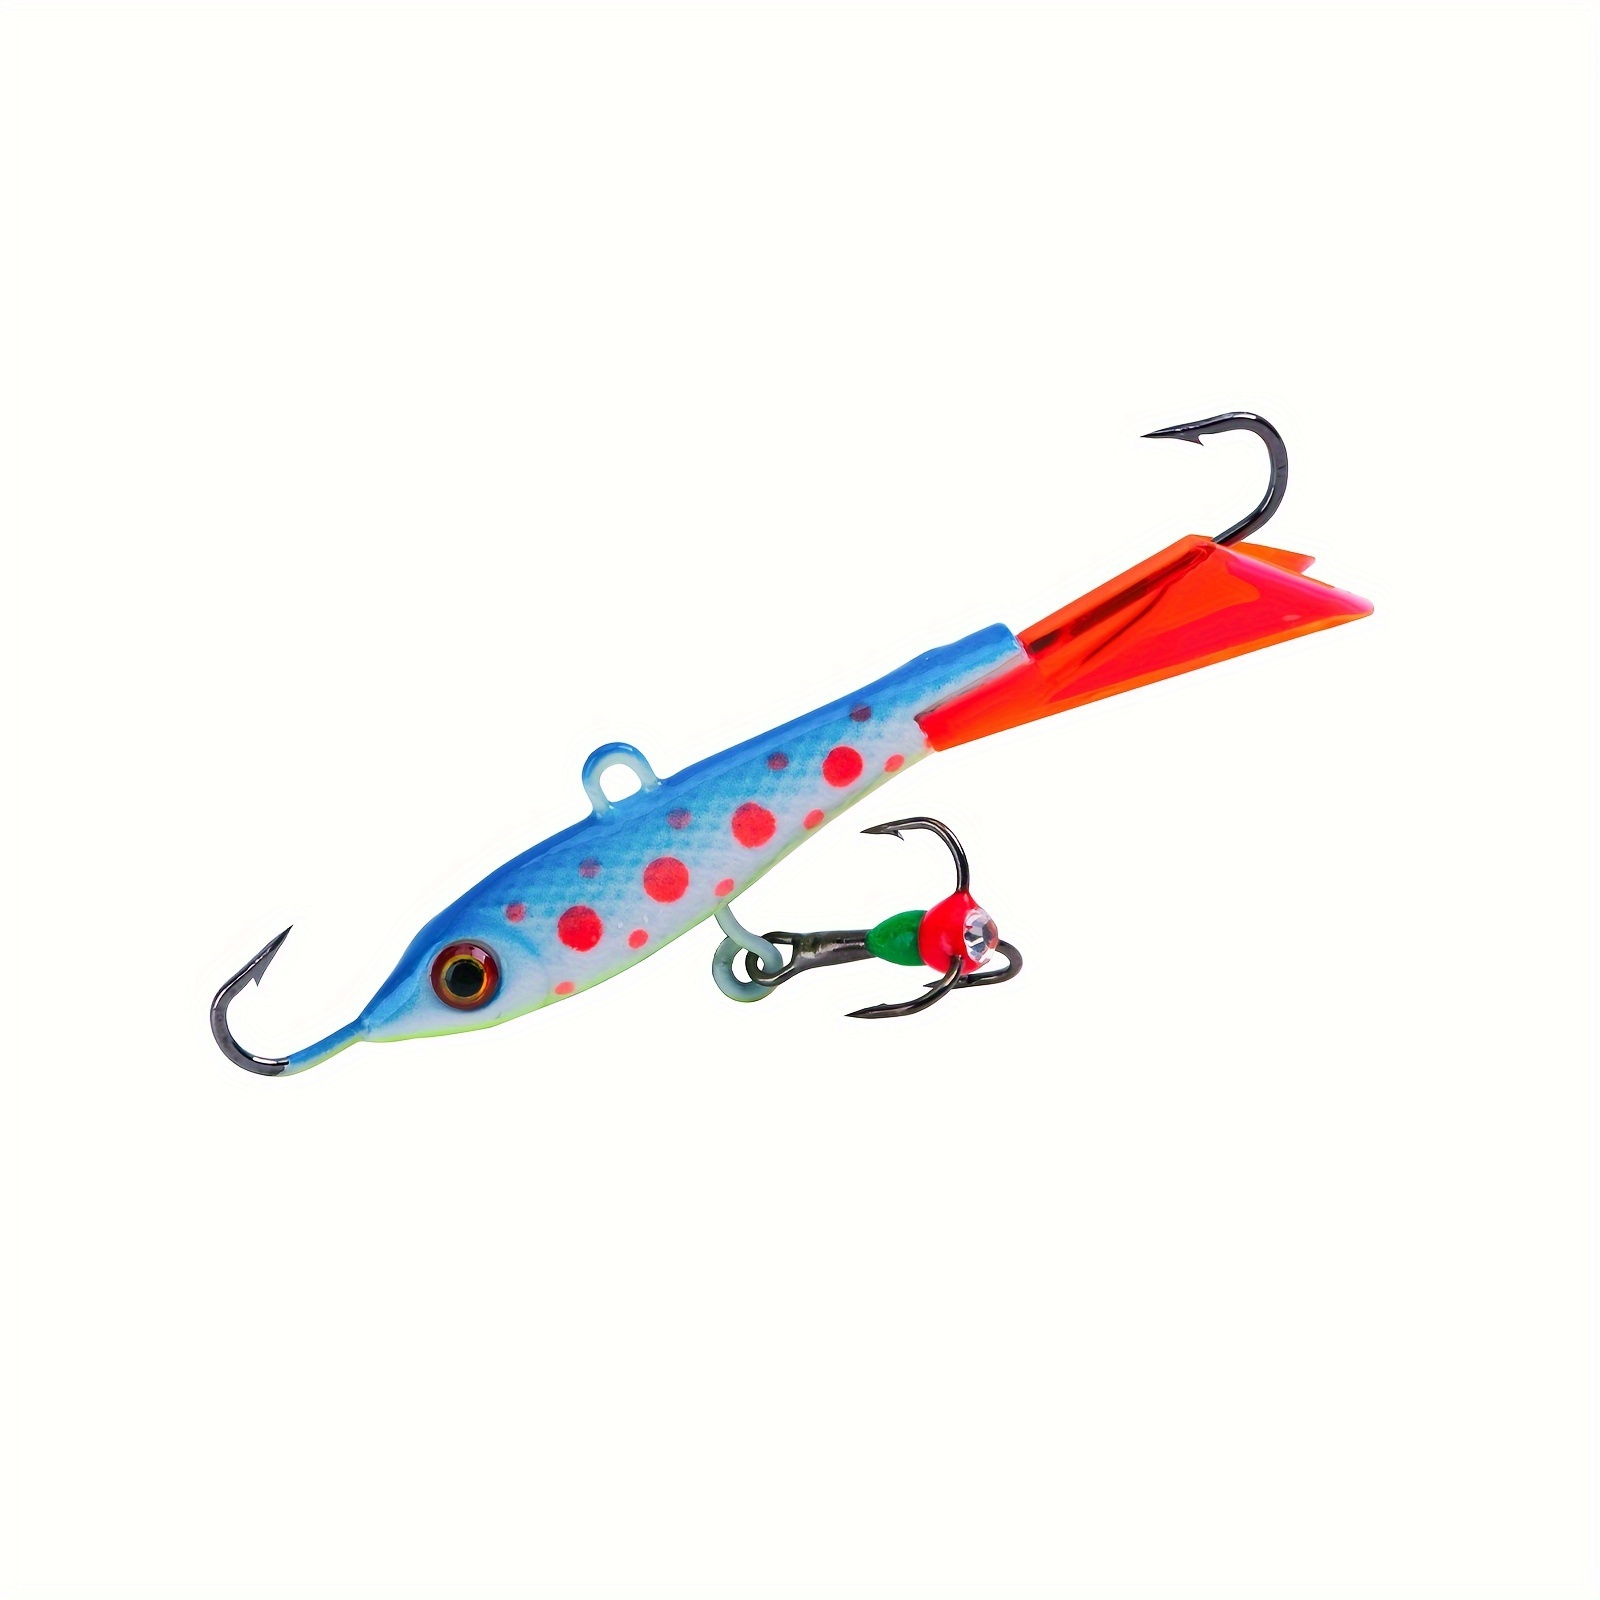 Sougayilang Ice Fishing Jigs, Winter Fishing Hard Lures with Treble Hooks,  Red, Colors Fishing Bait Lure Kit in Tackle Box for B